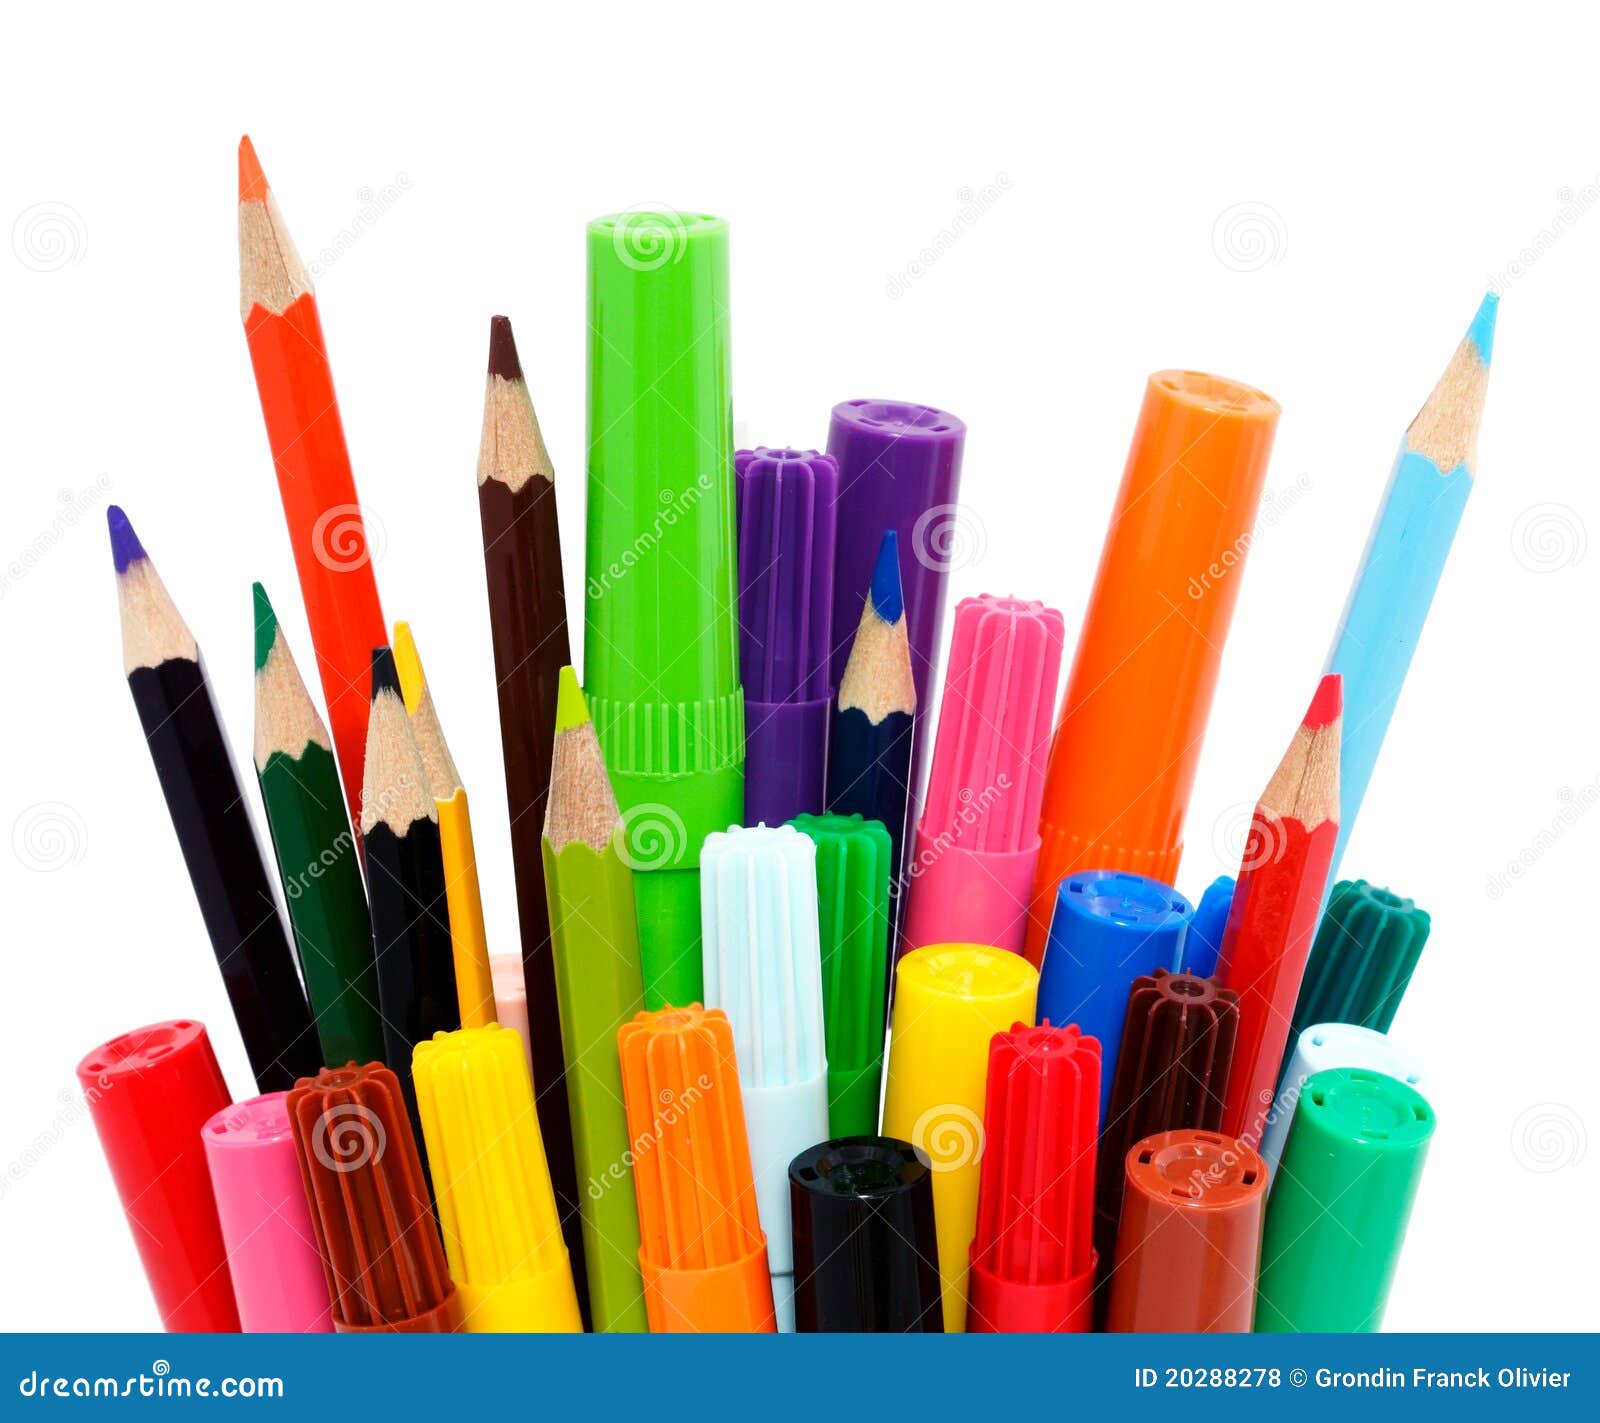 https://thumbs.dreamstime.com/z/colorful-pencils-markers-20288278.jpg